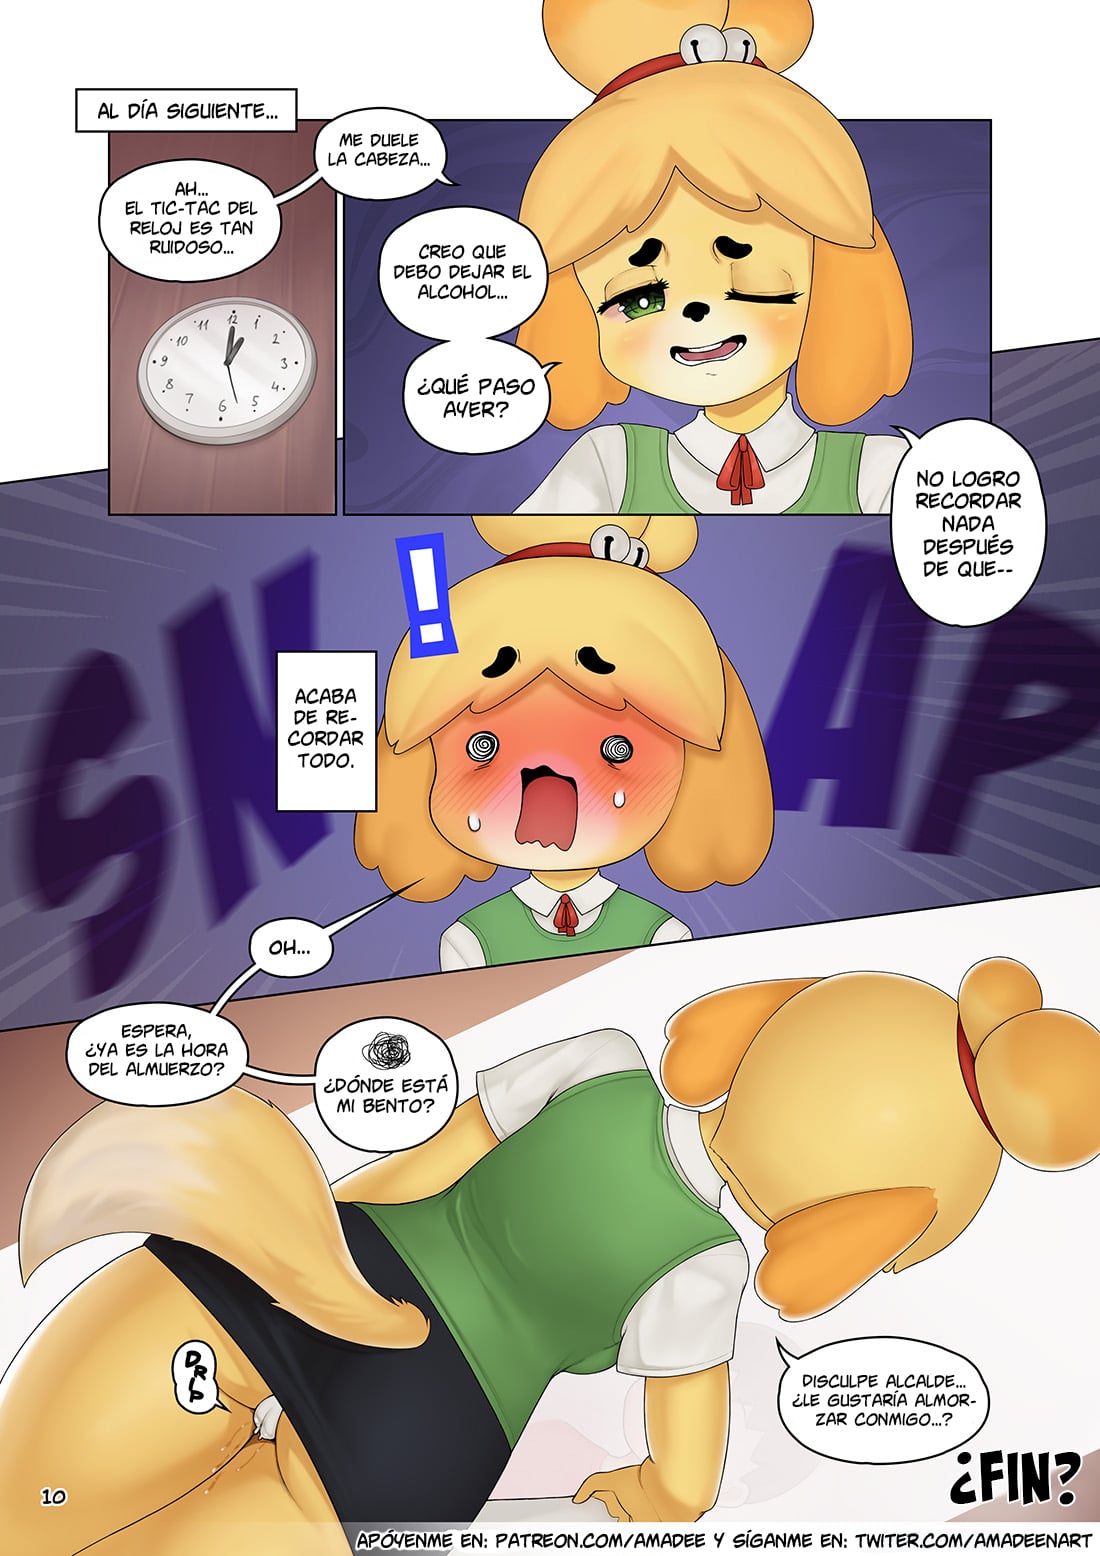 Isabell on villager porn comic